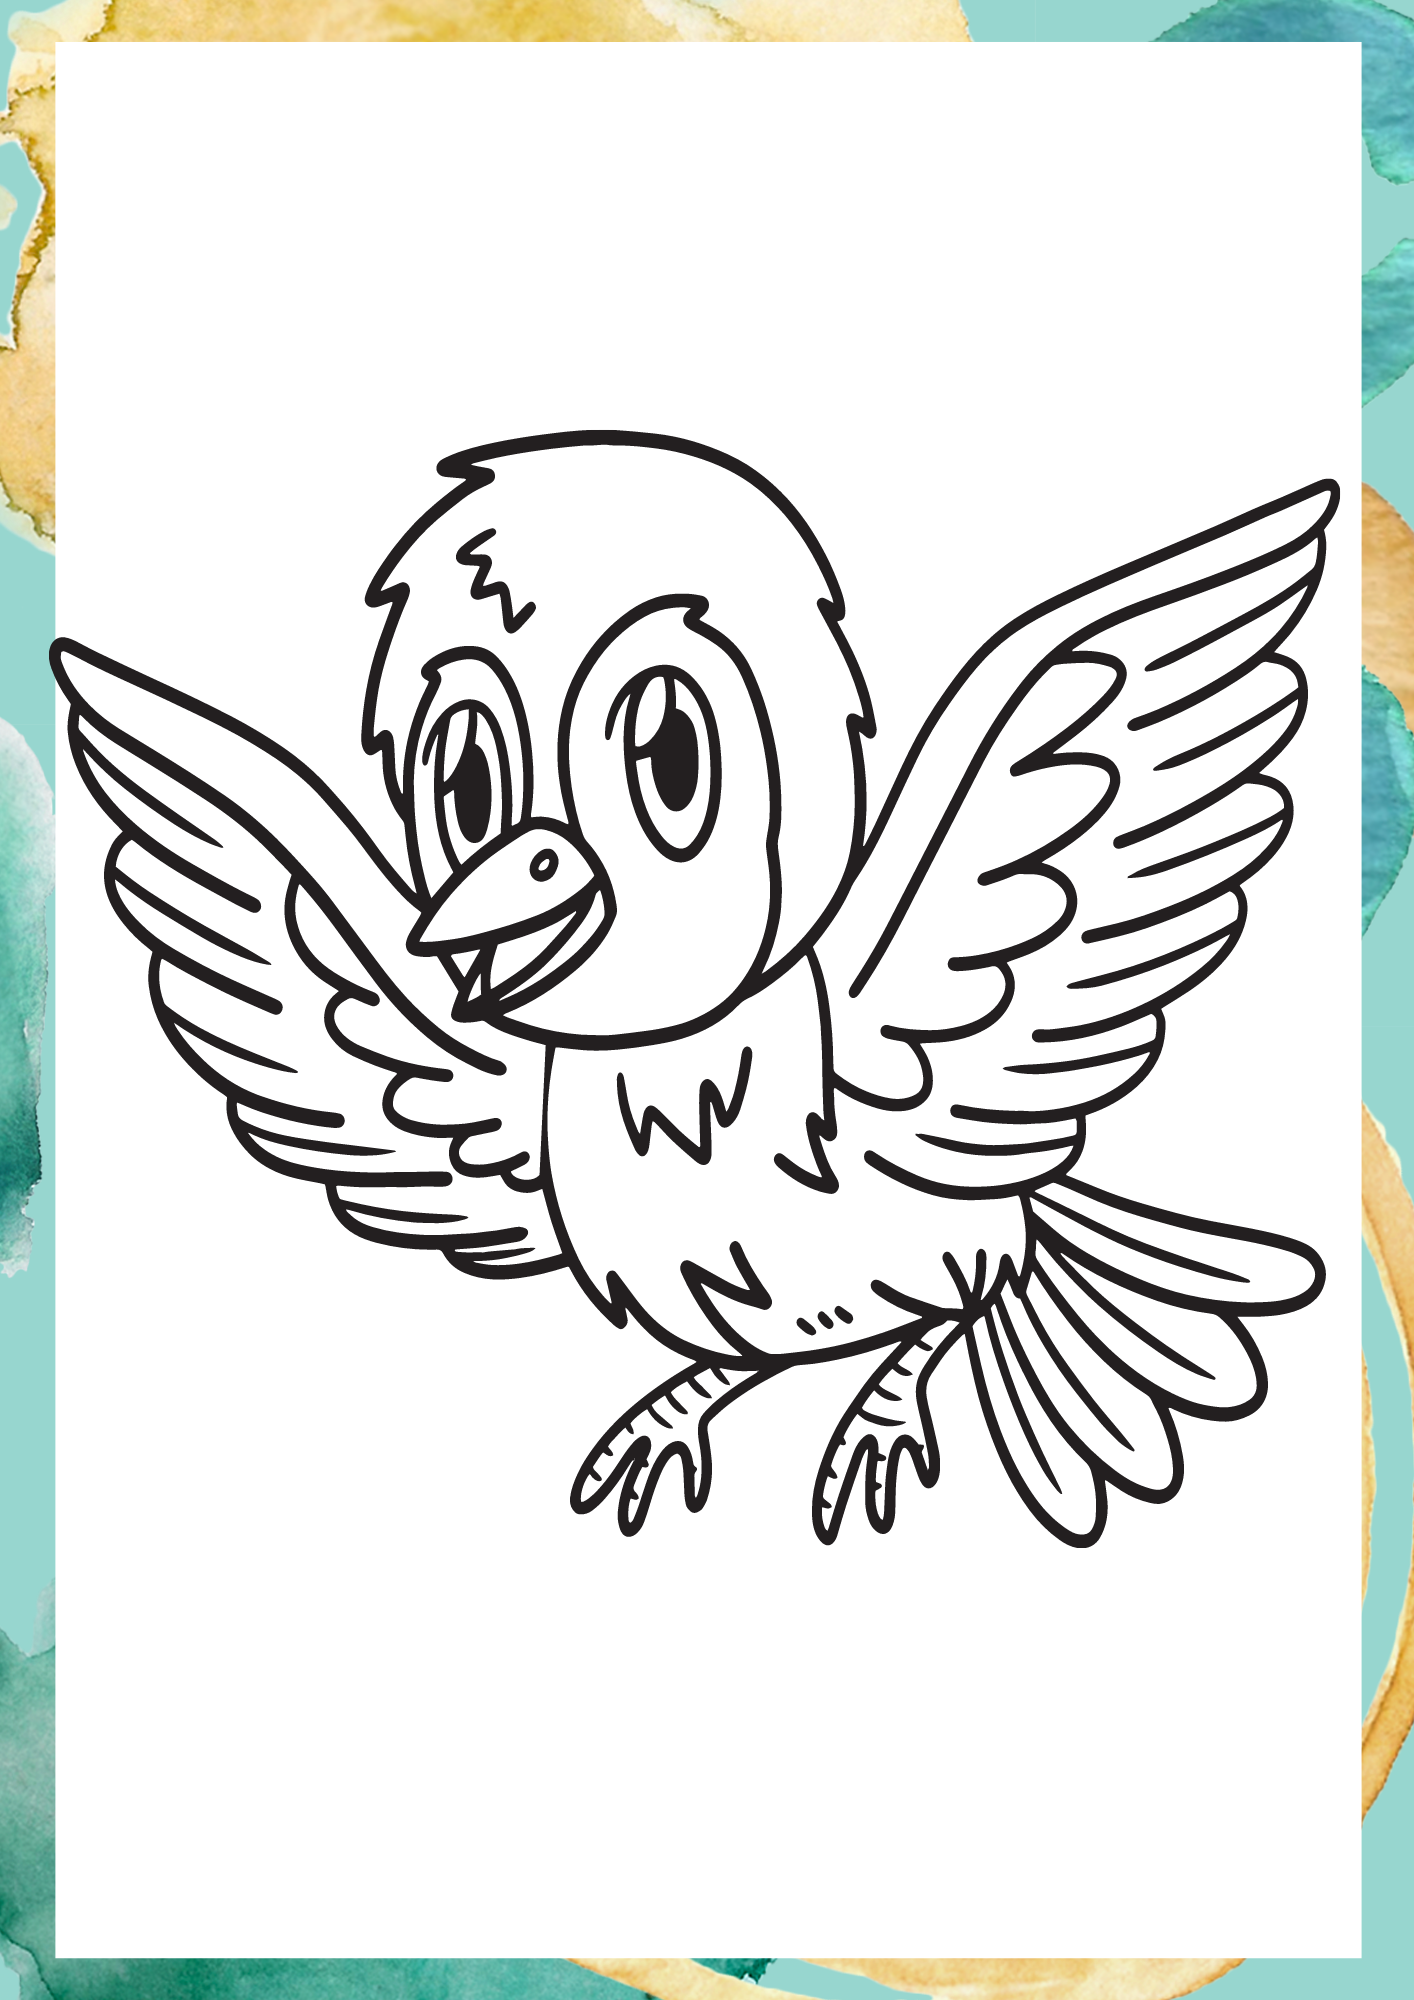 sparrow coloring page, bird coloring page, coloring page, coloring page for toddlers, Coloring Page, coloring sheet, happy color, colouring, free coloring pages, coloring pages for kids, printable coloring pages, cute coloring pages, colouring pages, colouring to print, free printable coloring pages, free coloring pages for kids, easy coloring pages, coloring sheets